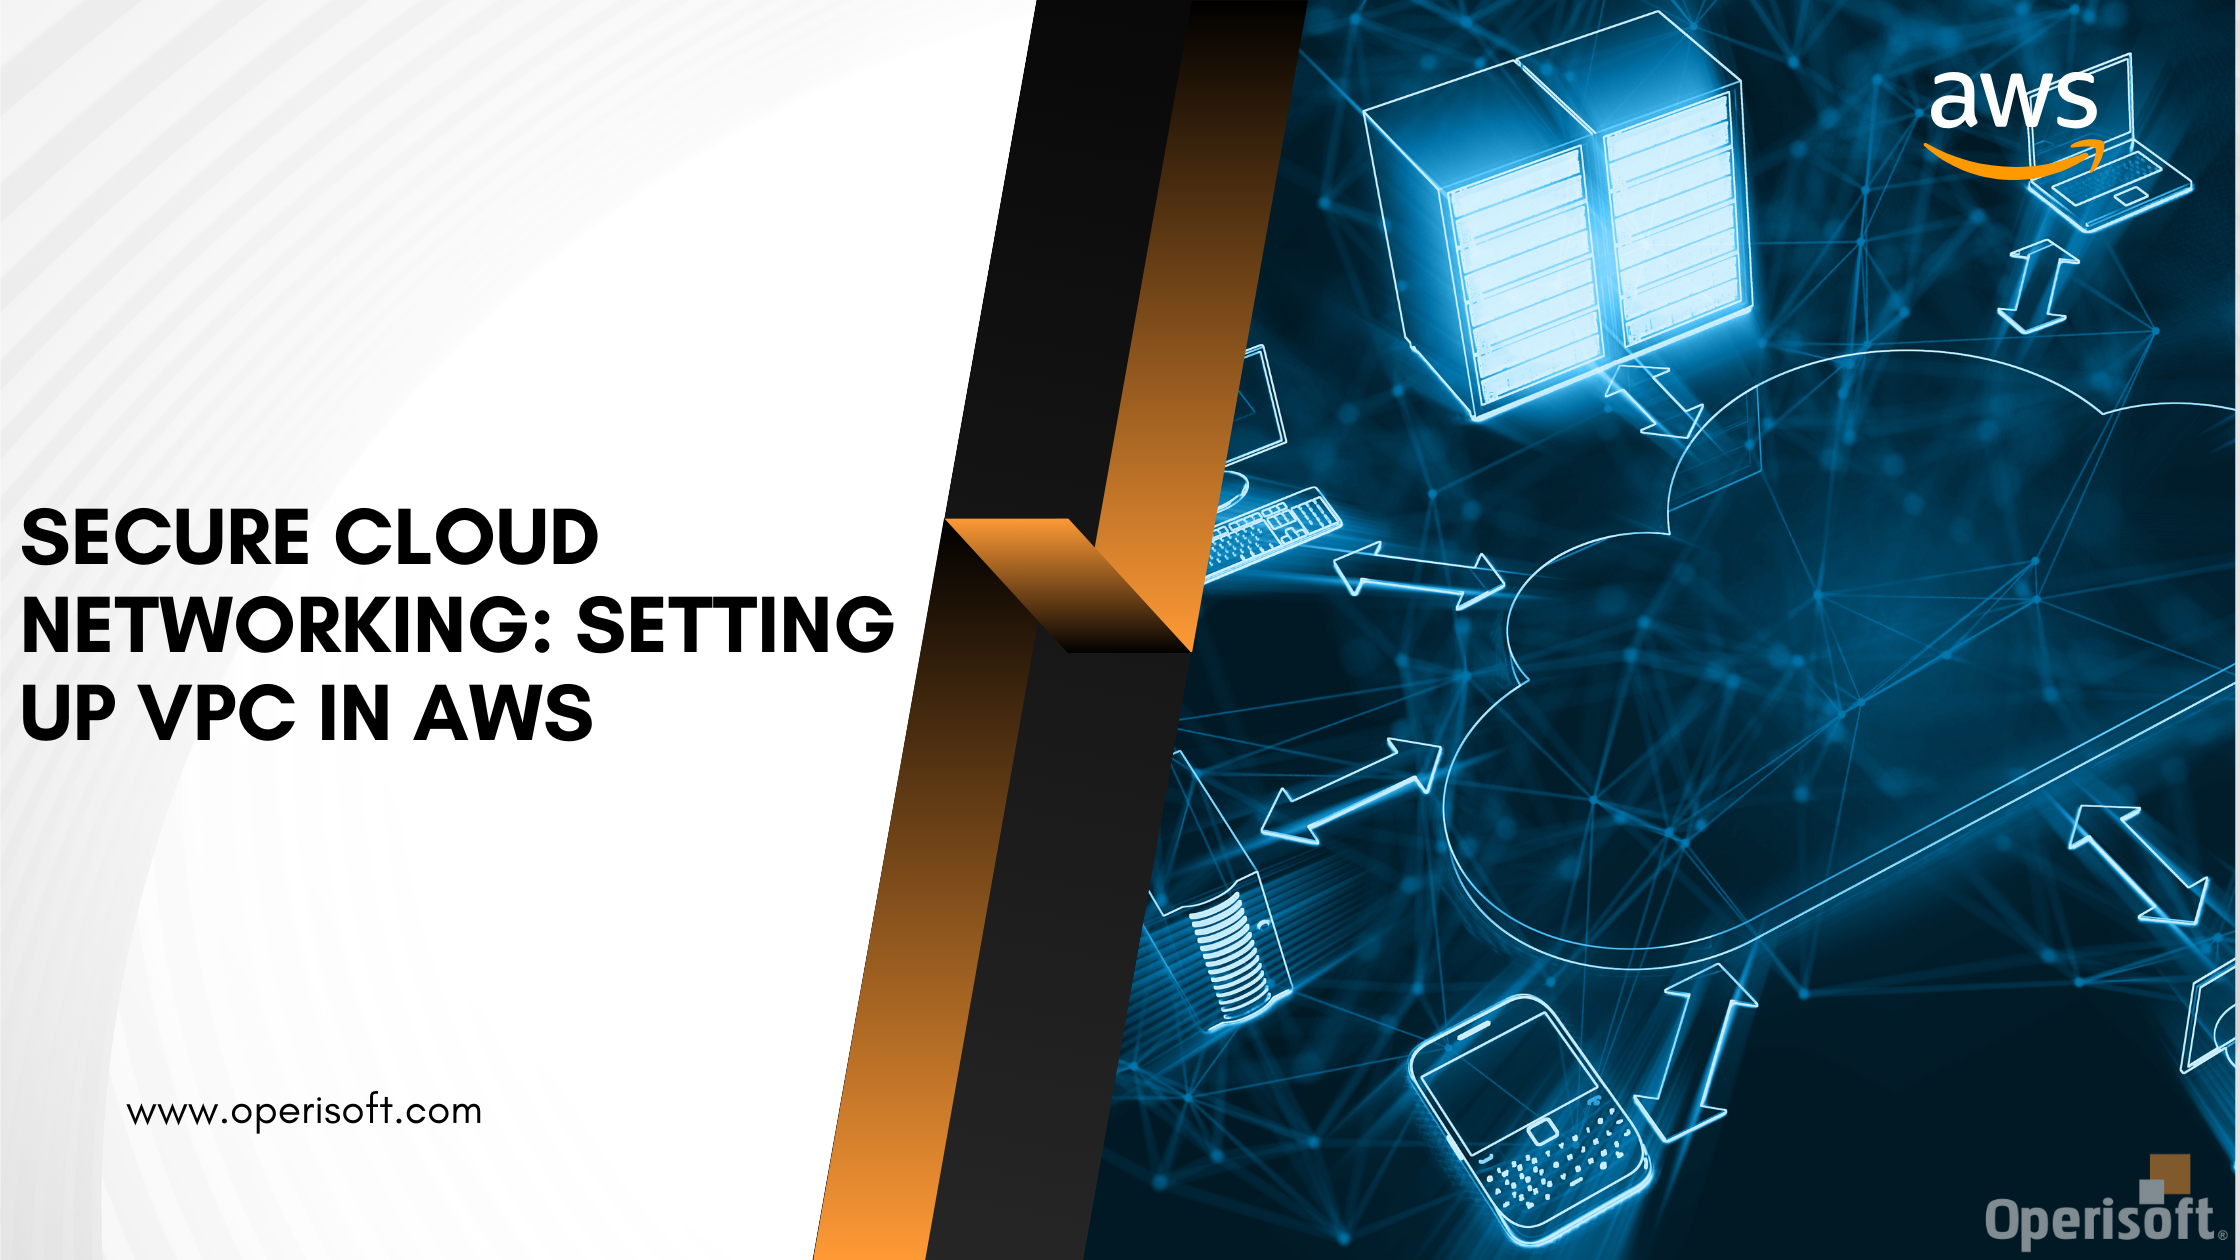 Secure Cloud Networking: Setting Up VPC in AWS